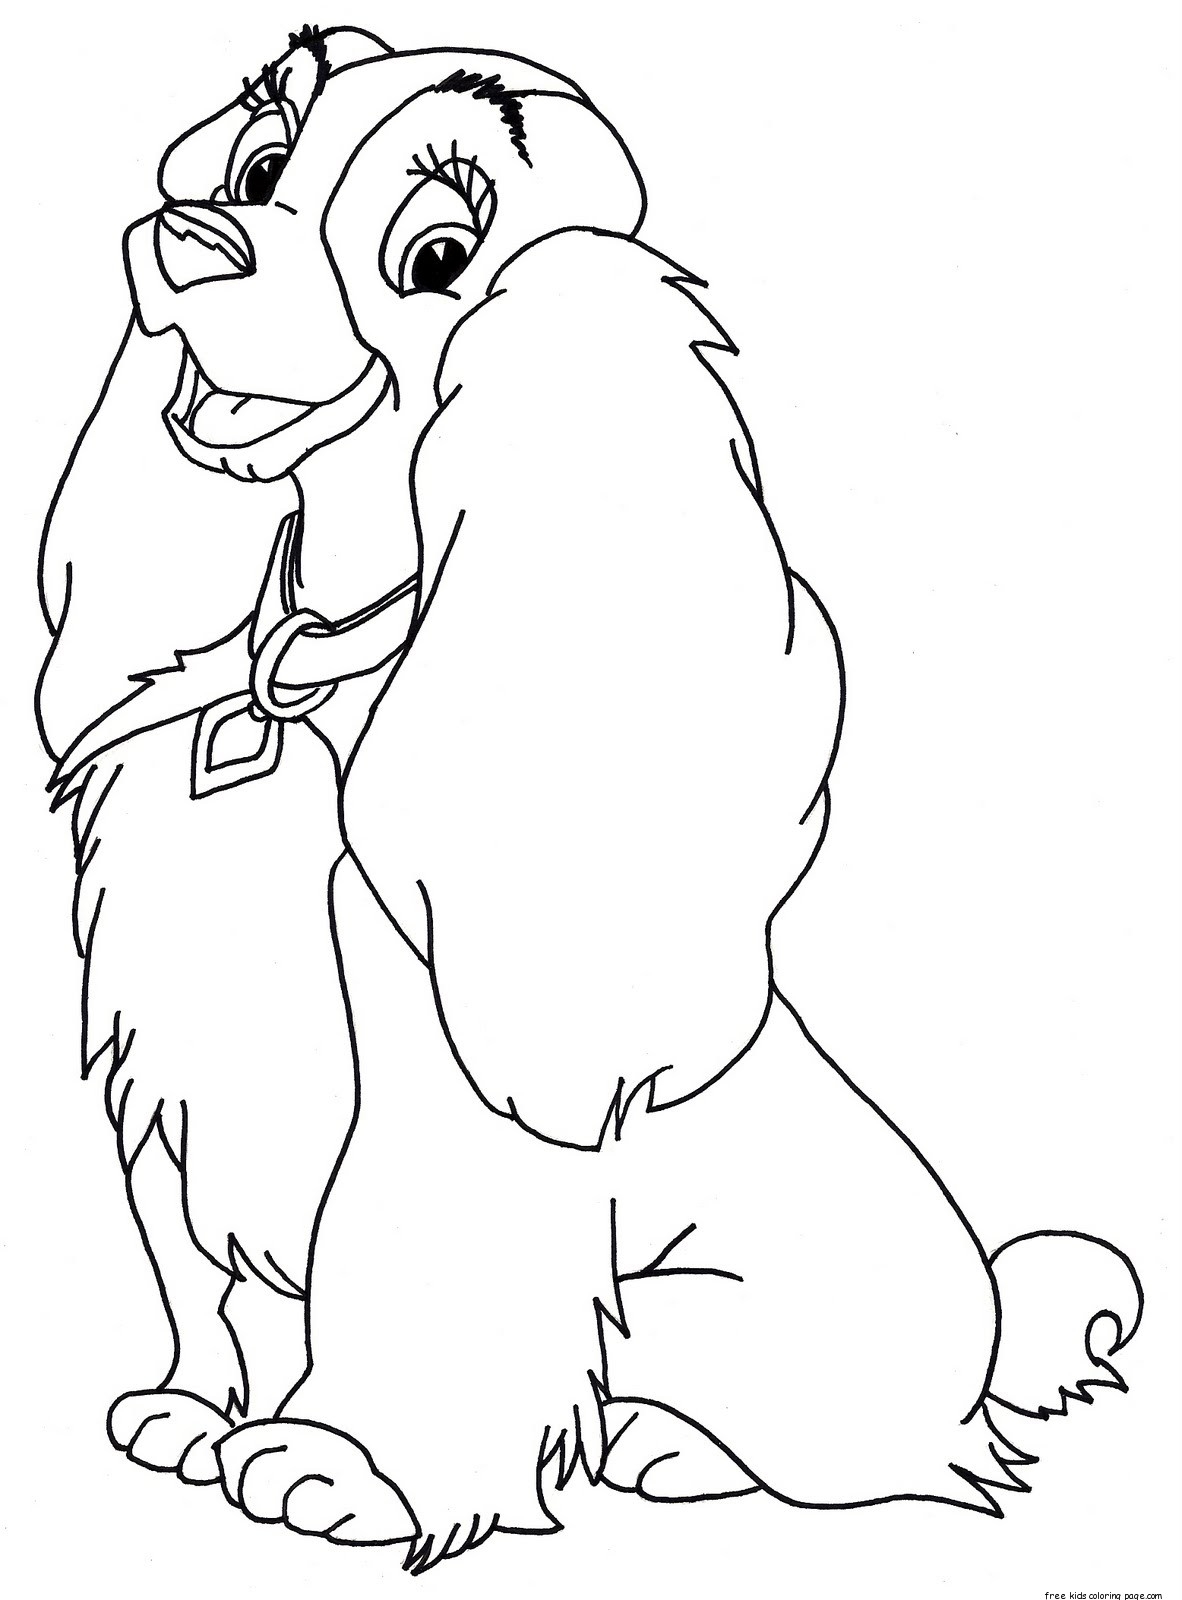 Lady And The Tramp 2 Coloring Pages at GetColorings.com | Free